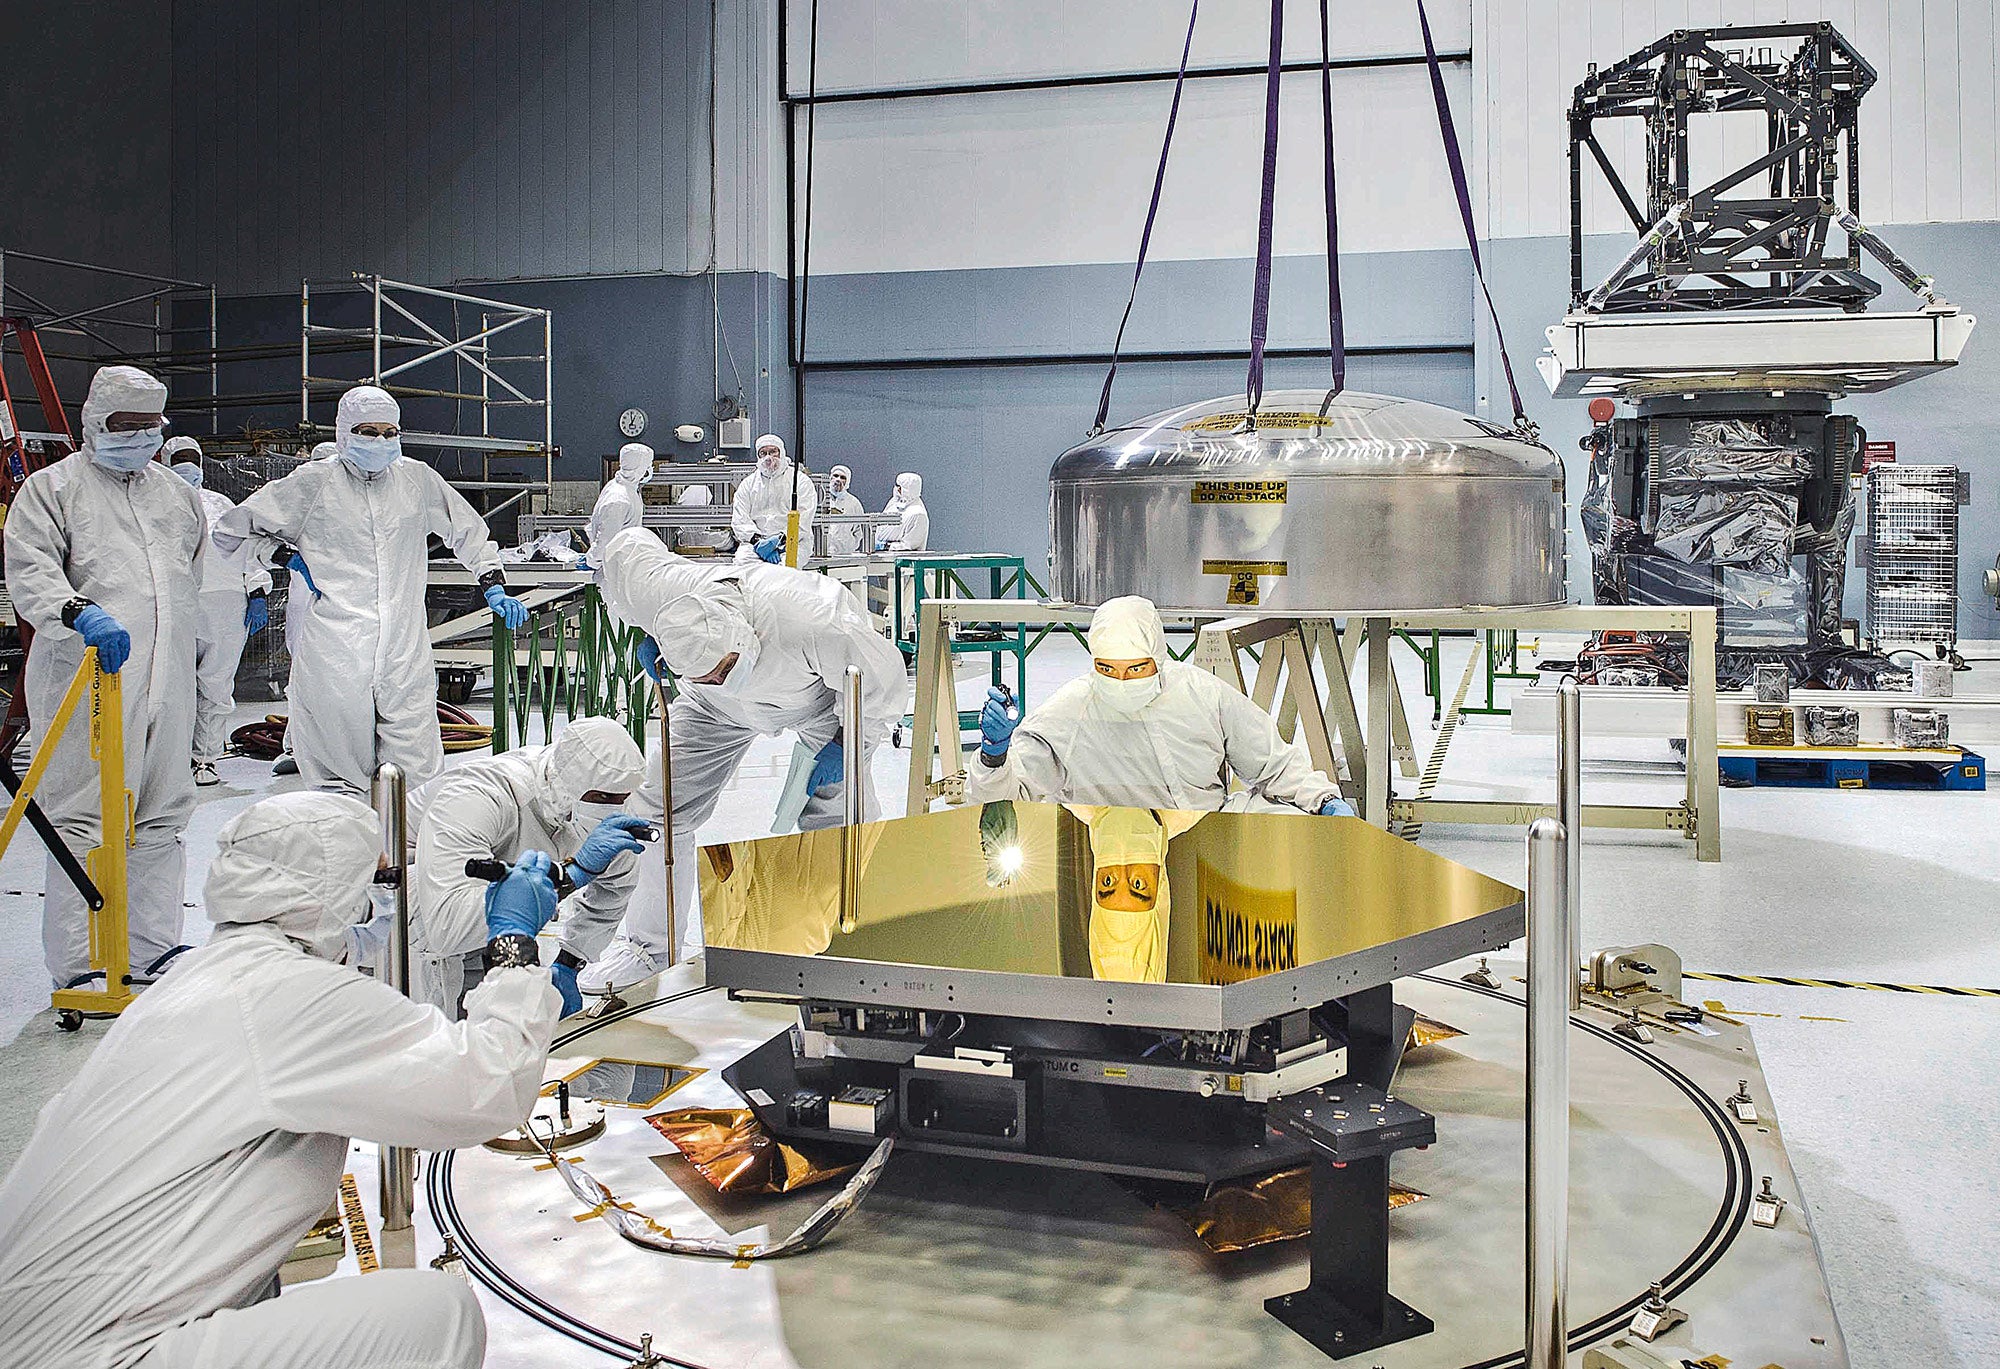 A team of scientists in a large room examines a golden mirror for the James Webb Space Telescope.